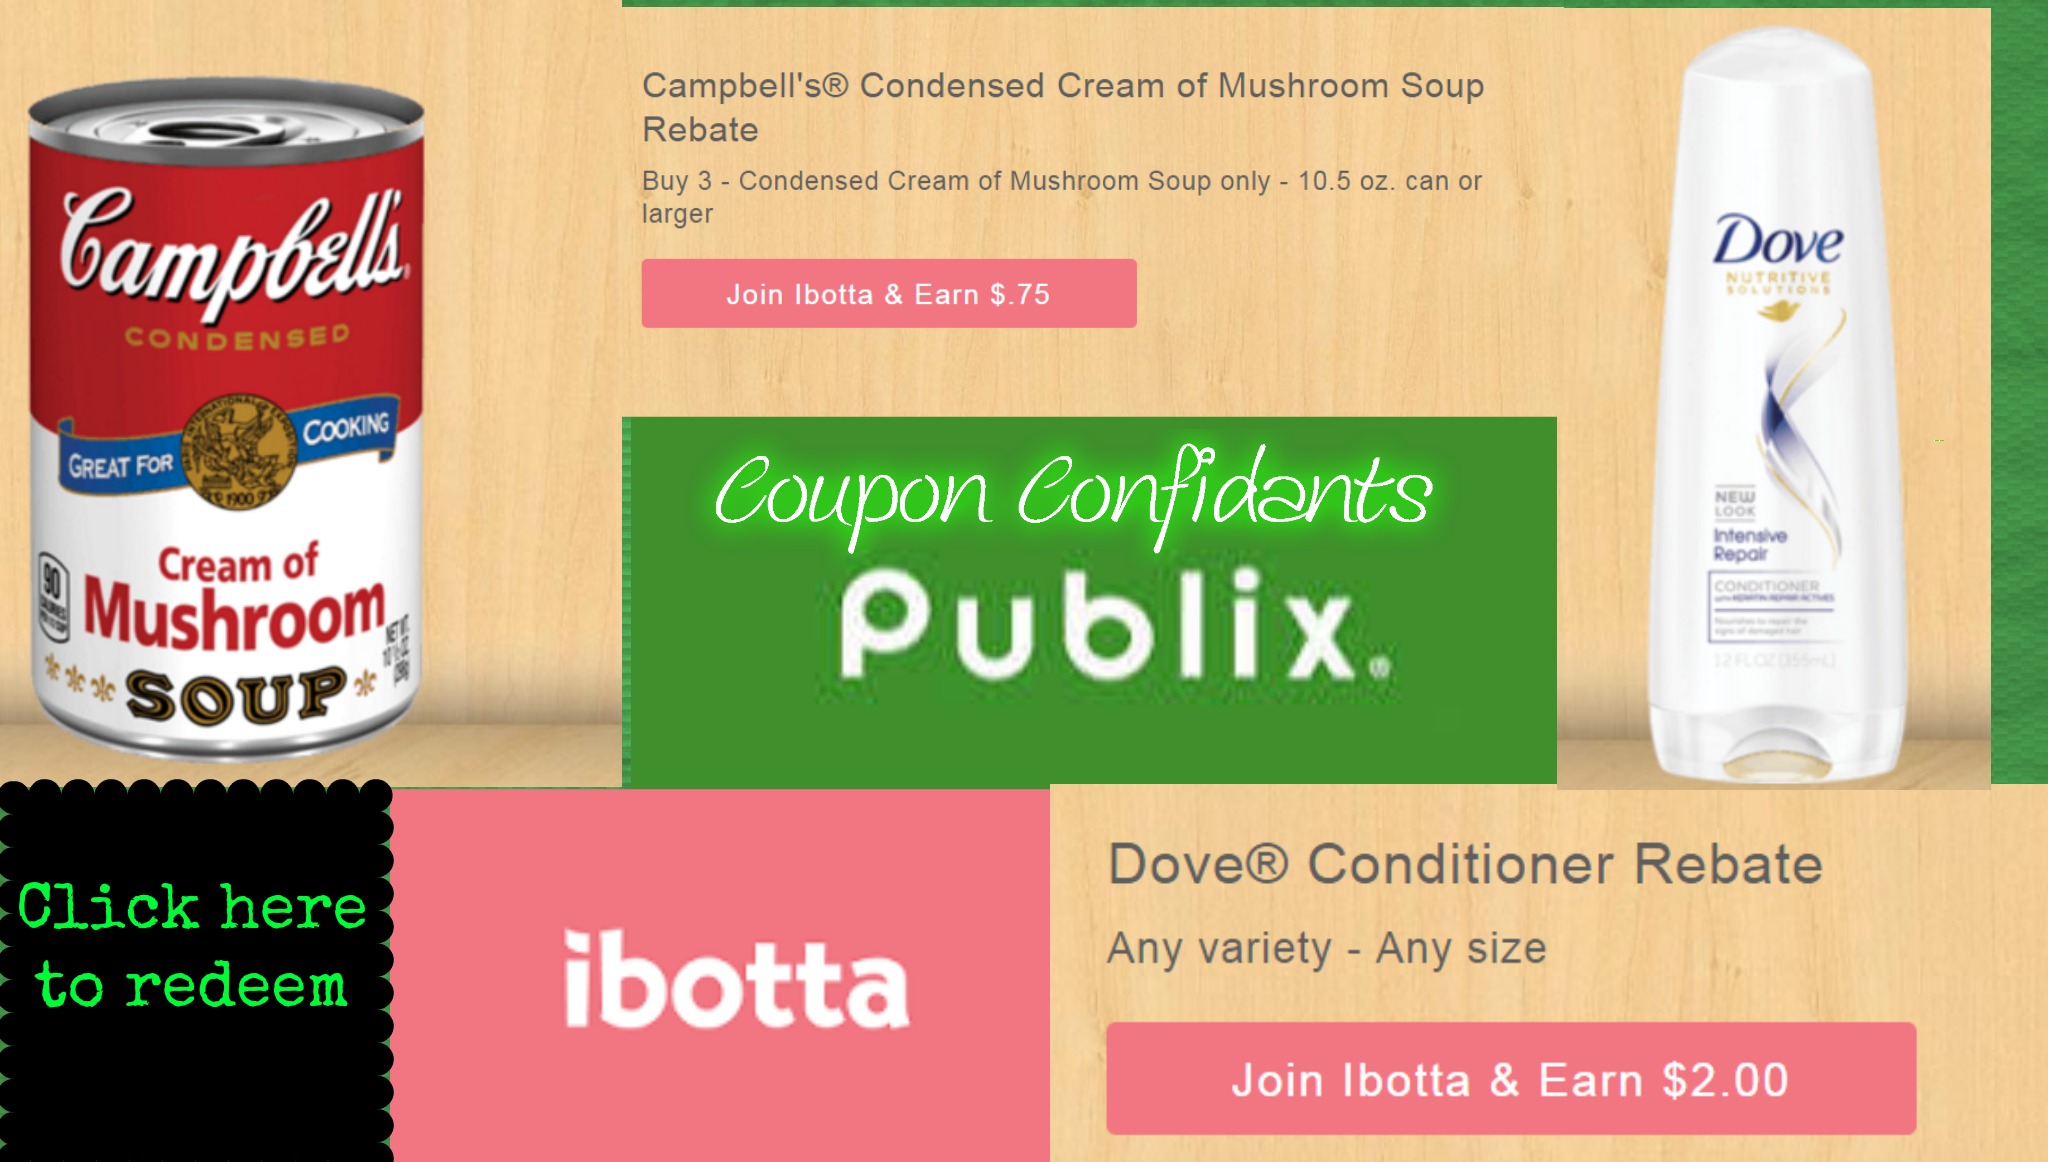 new-ibotta-rebates-on-publix-deals-like-dove-campbells-quilted